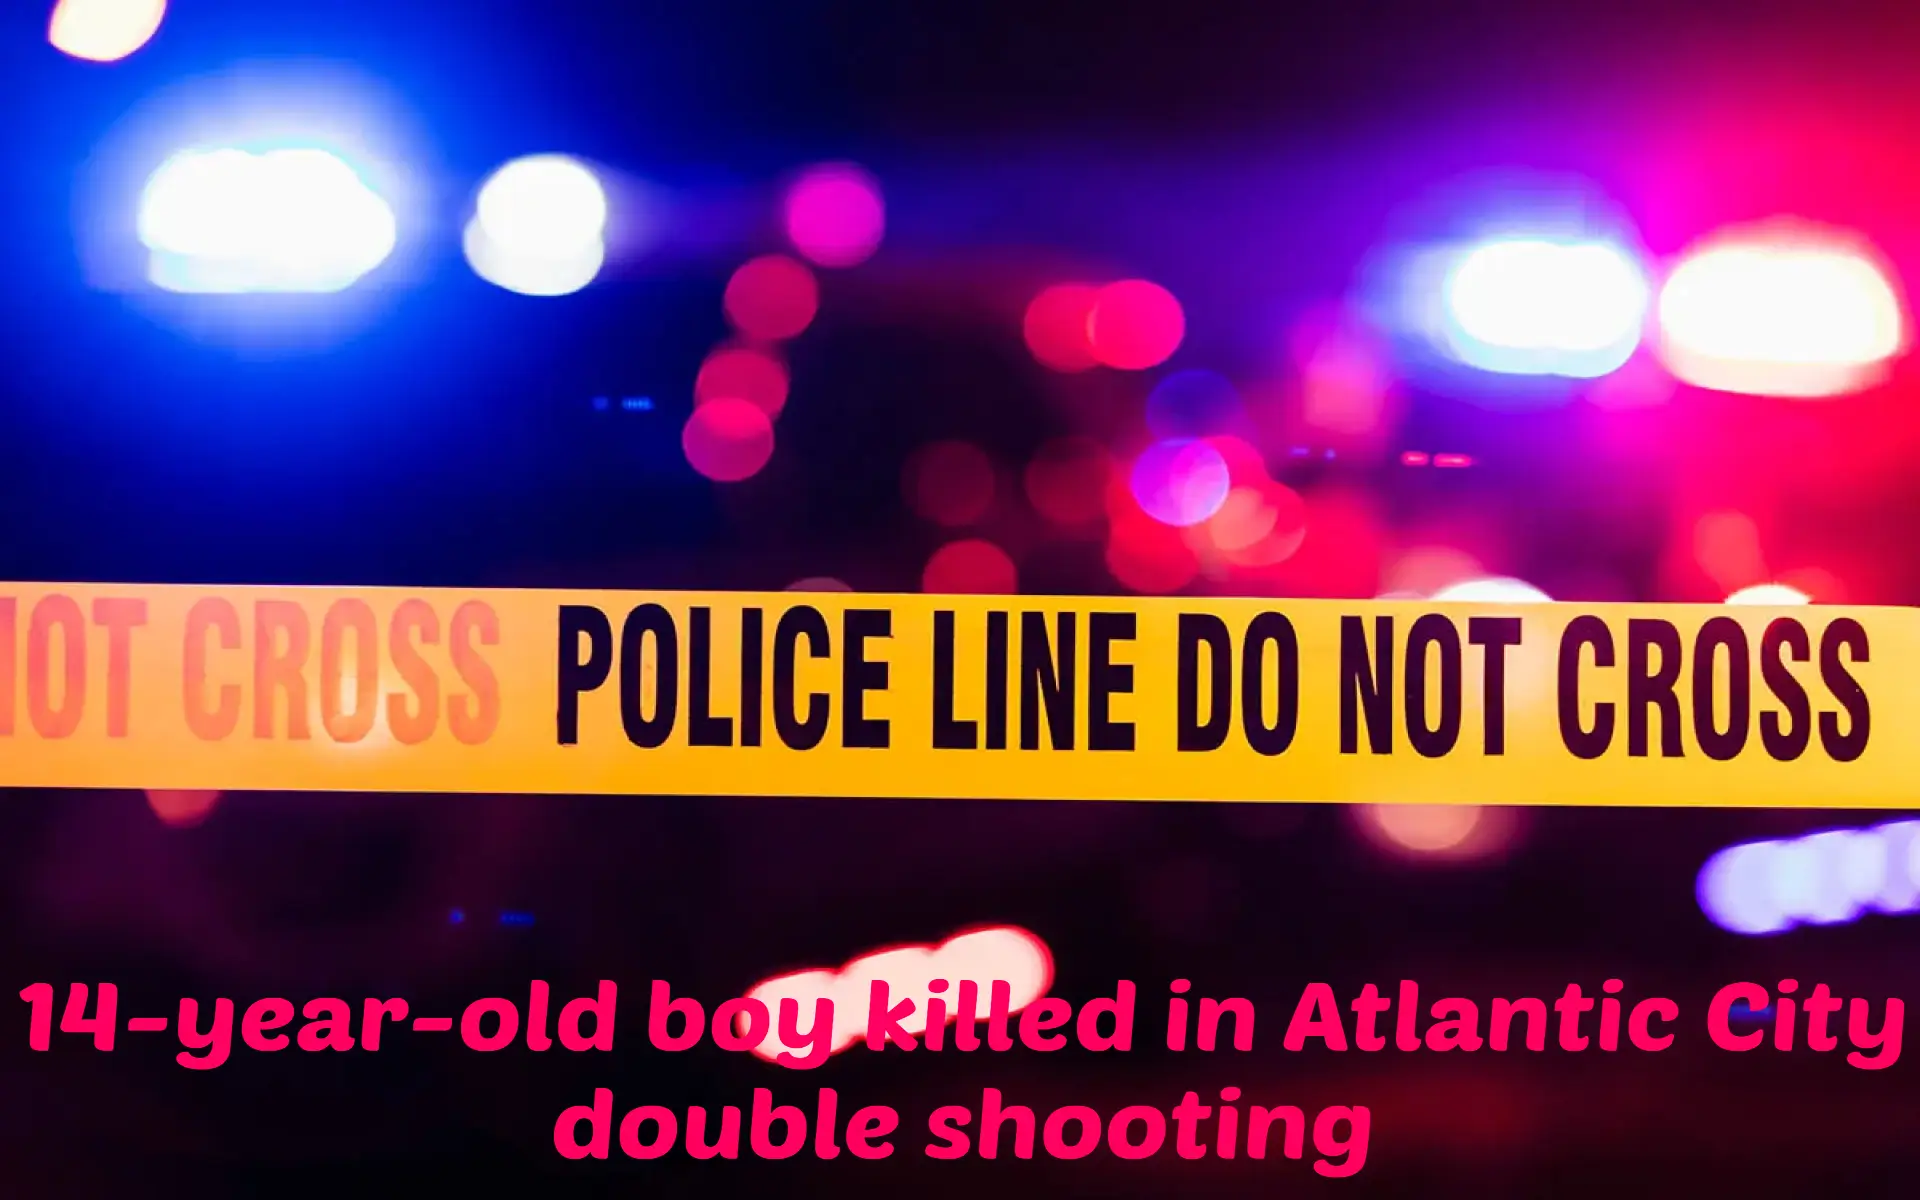 Tragic Incident in Atlantic City: A Closer Look at the Shooting of a 14-Year-Old Boy